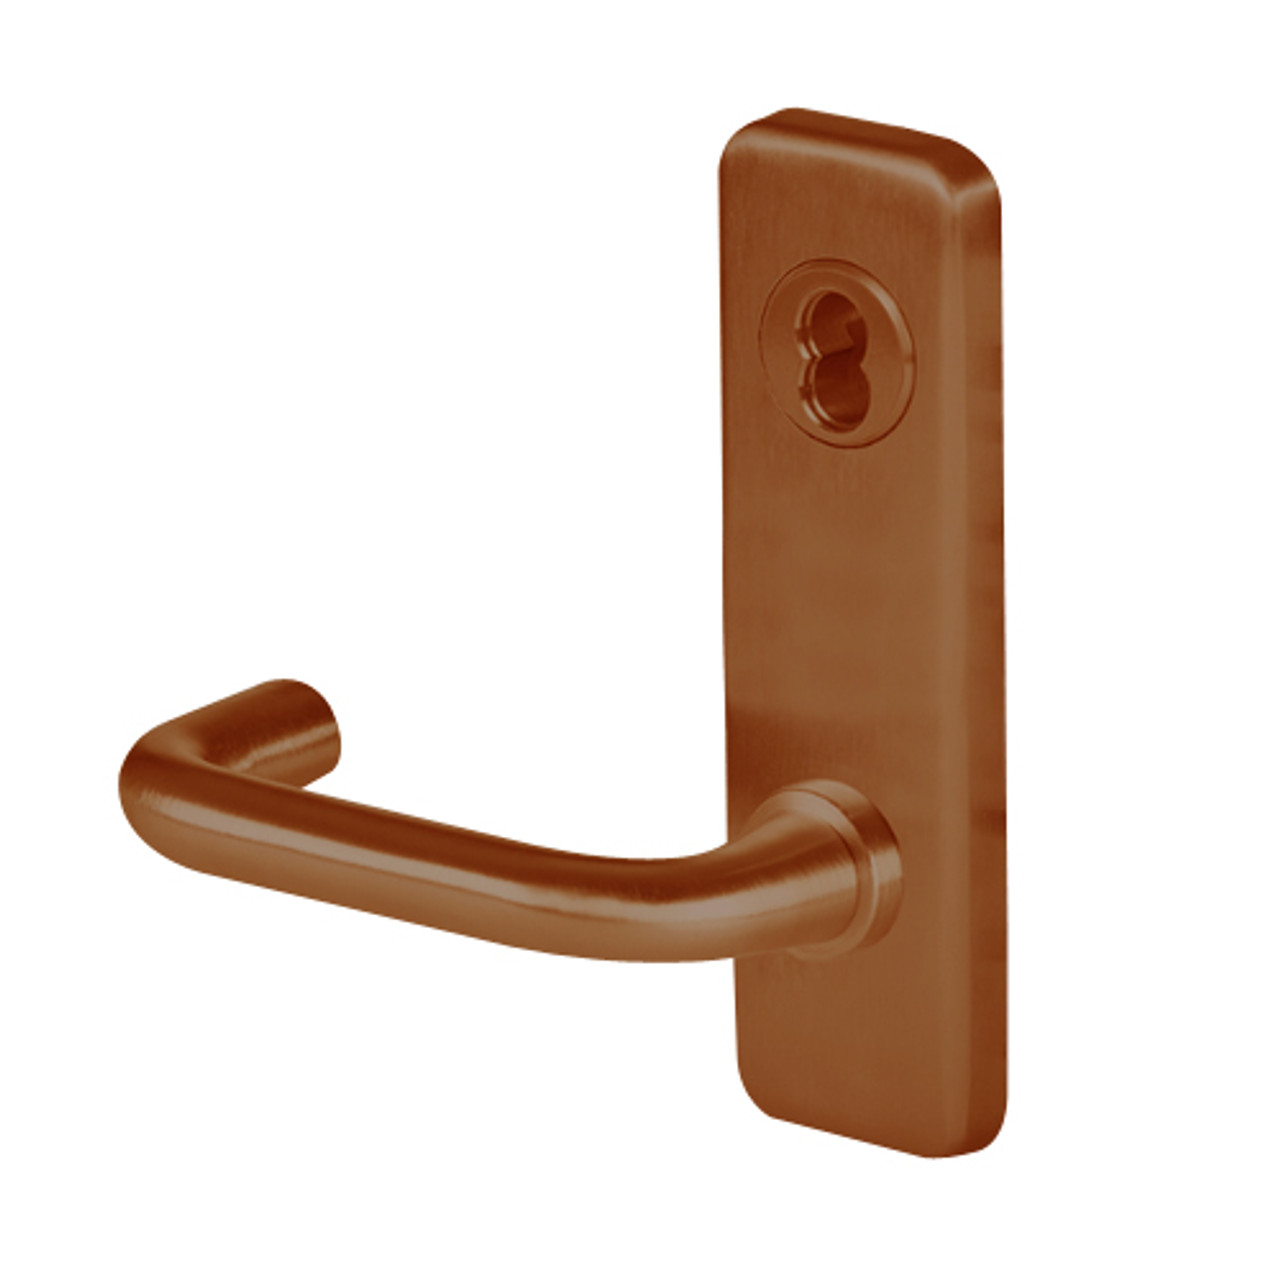 45H0LT3J690 Best 40H Series Privacy Heavy Duty Mortise Lever Lock with Solid Tube Return Style in Dark Bronze